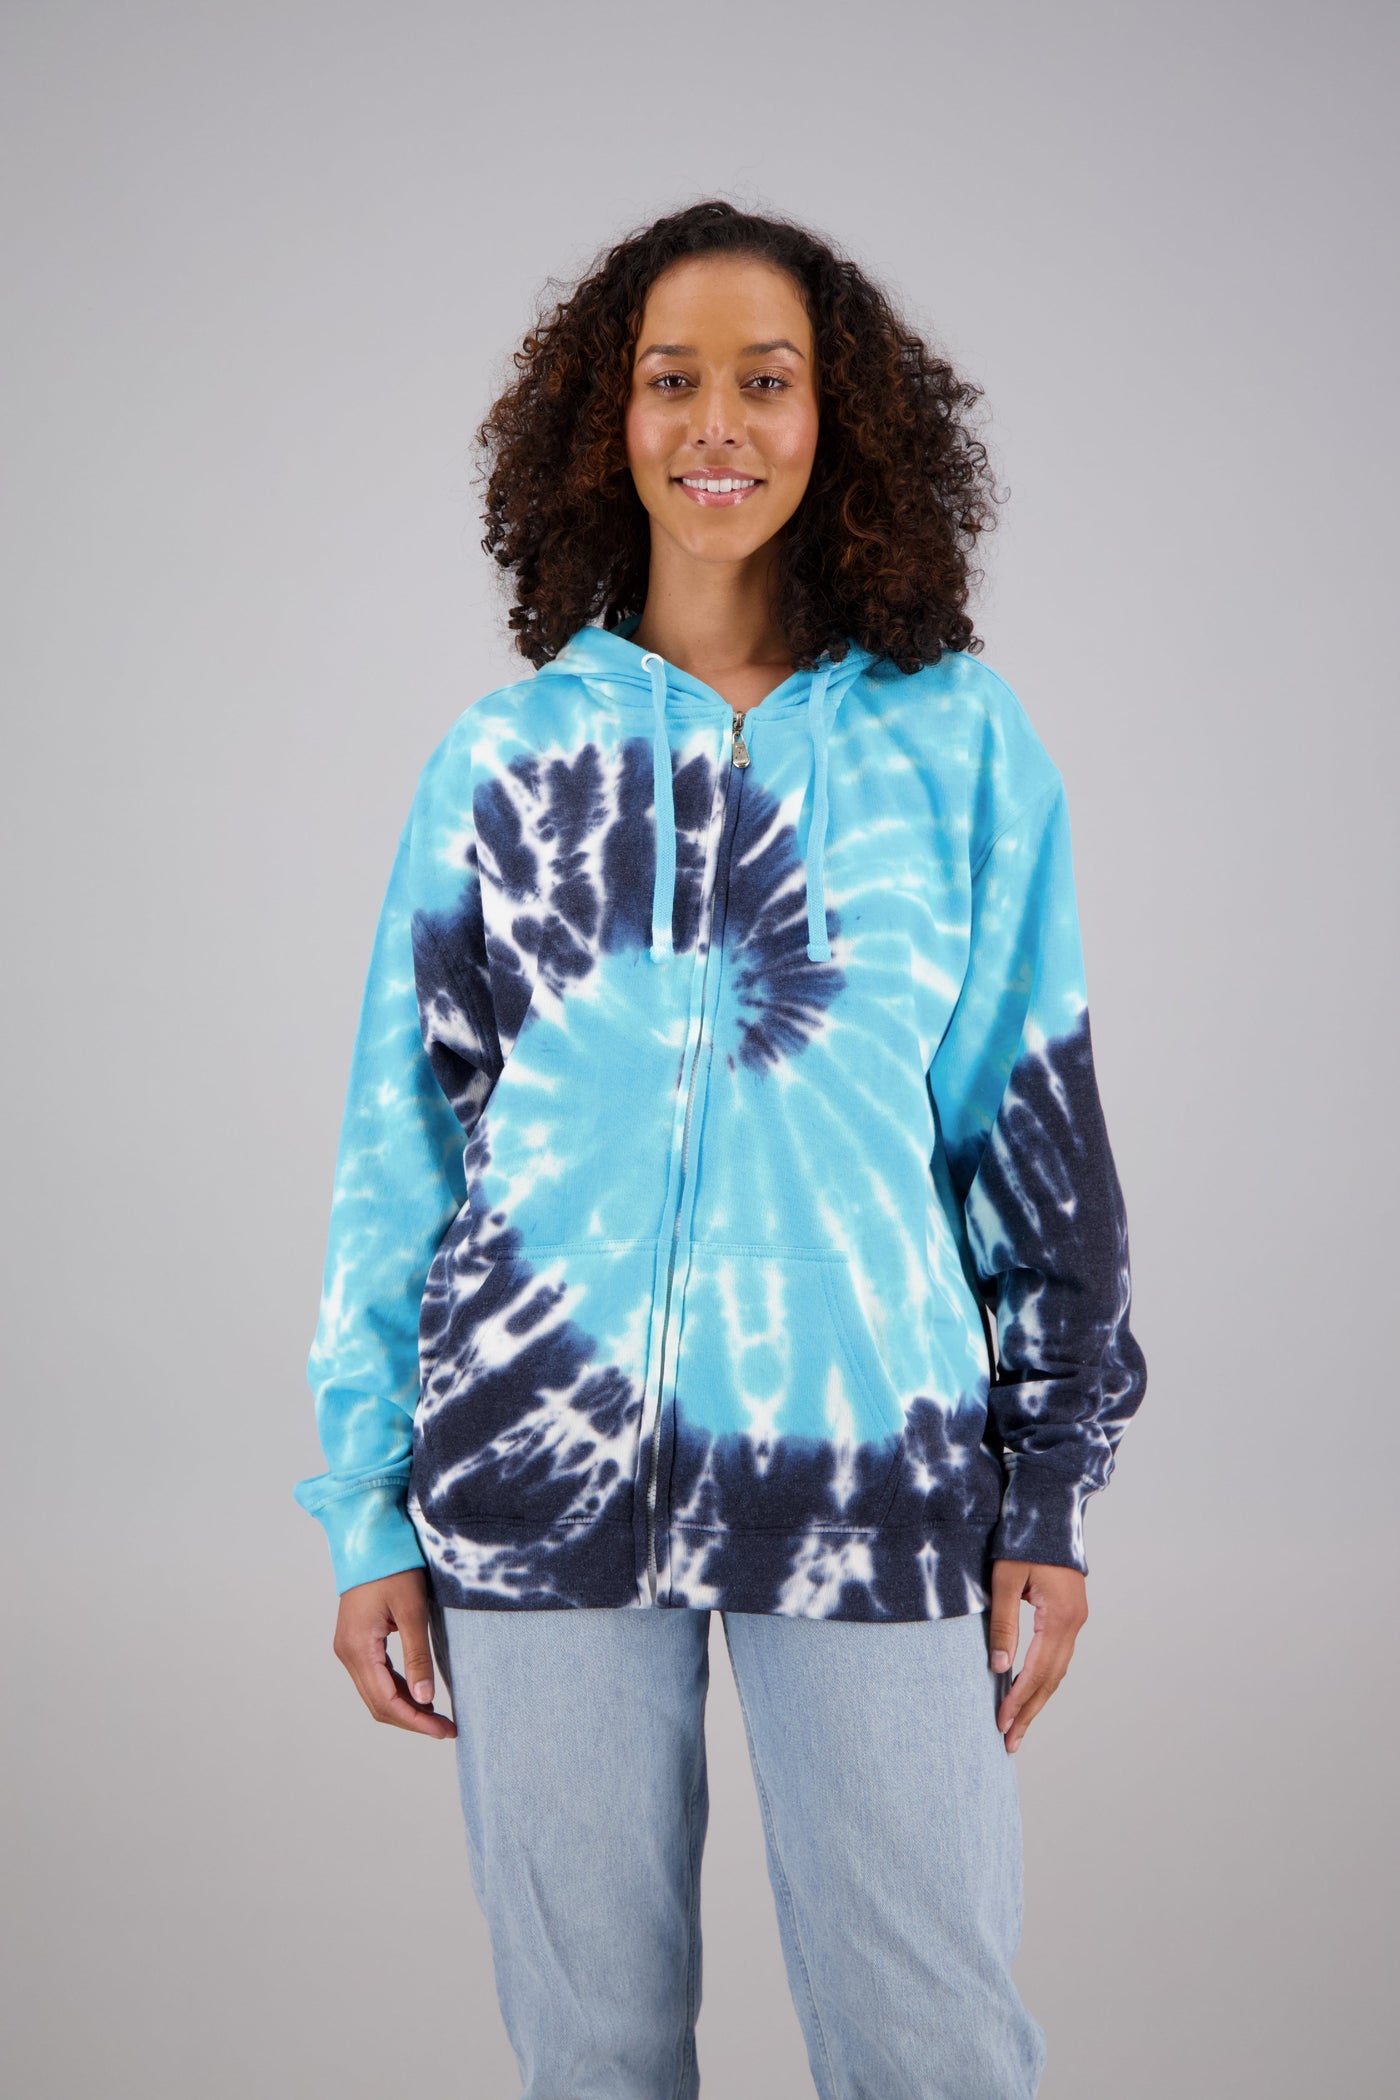 Adult's Tie-Dye Zip-Up Hoodie (2-XL) Cotton/Polyester Blend 9661